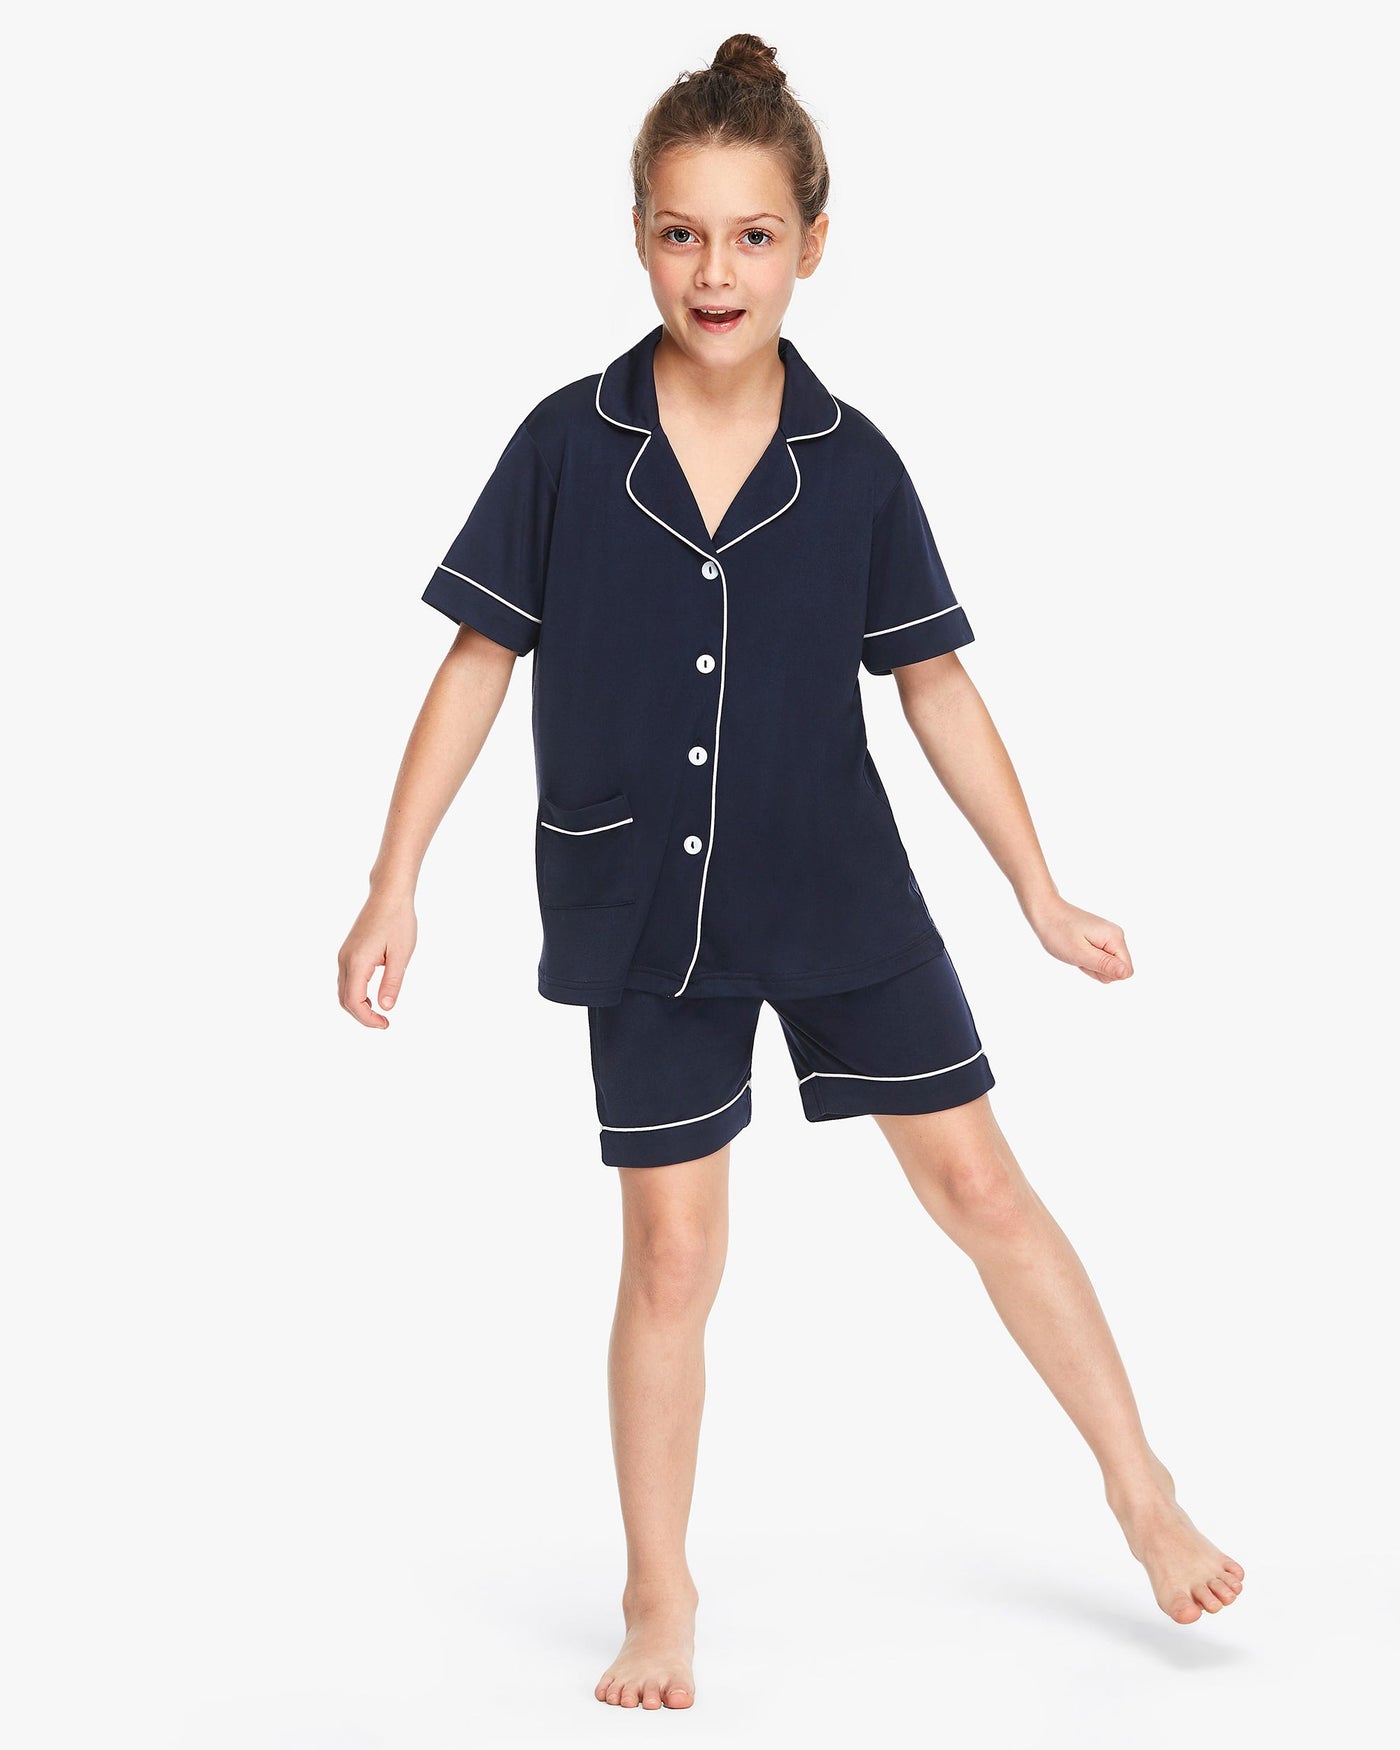 Chic Trimmed Kids Silk Knitted Pajamas Set Navy Blue LILYSILK Factory